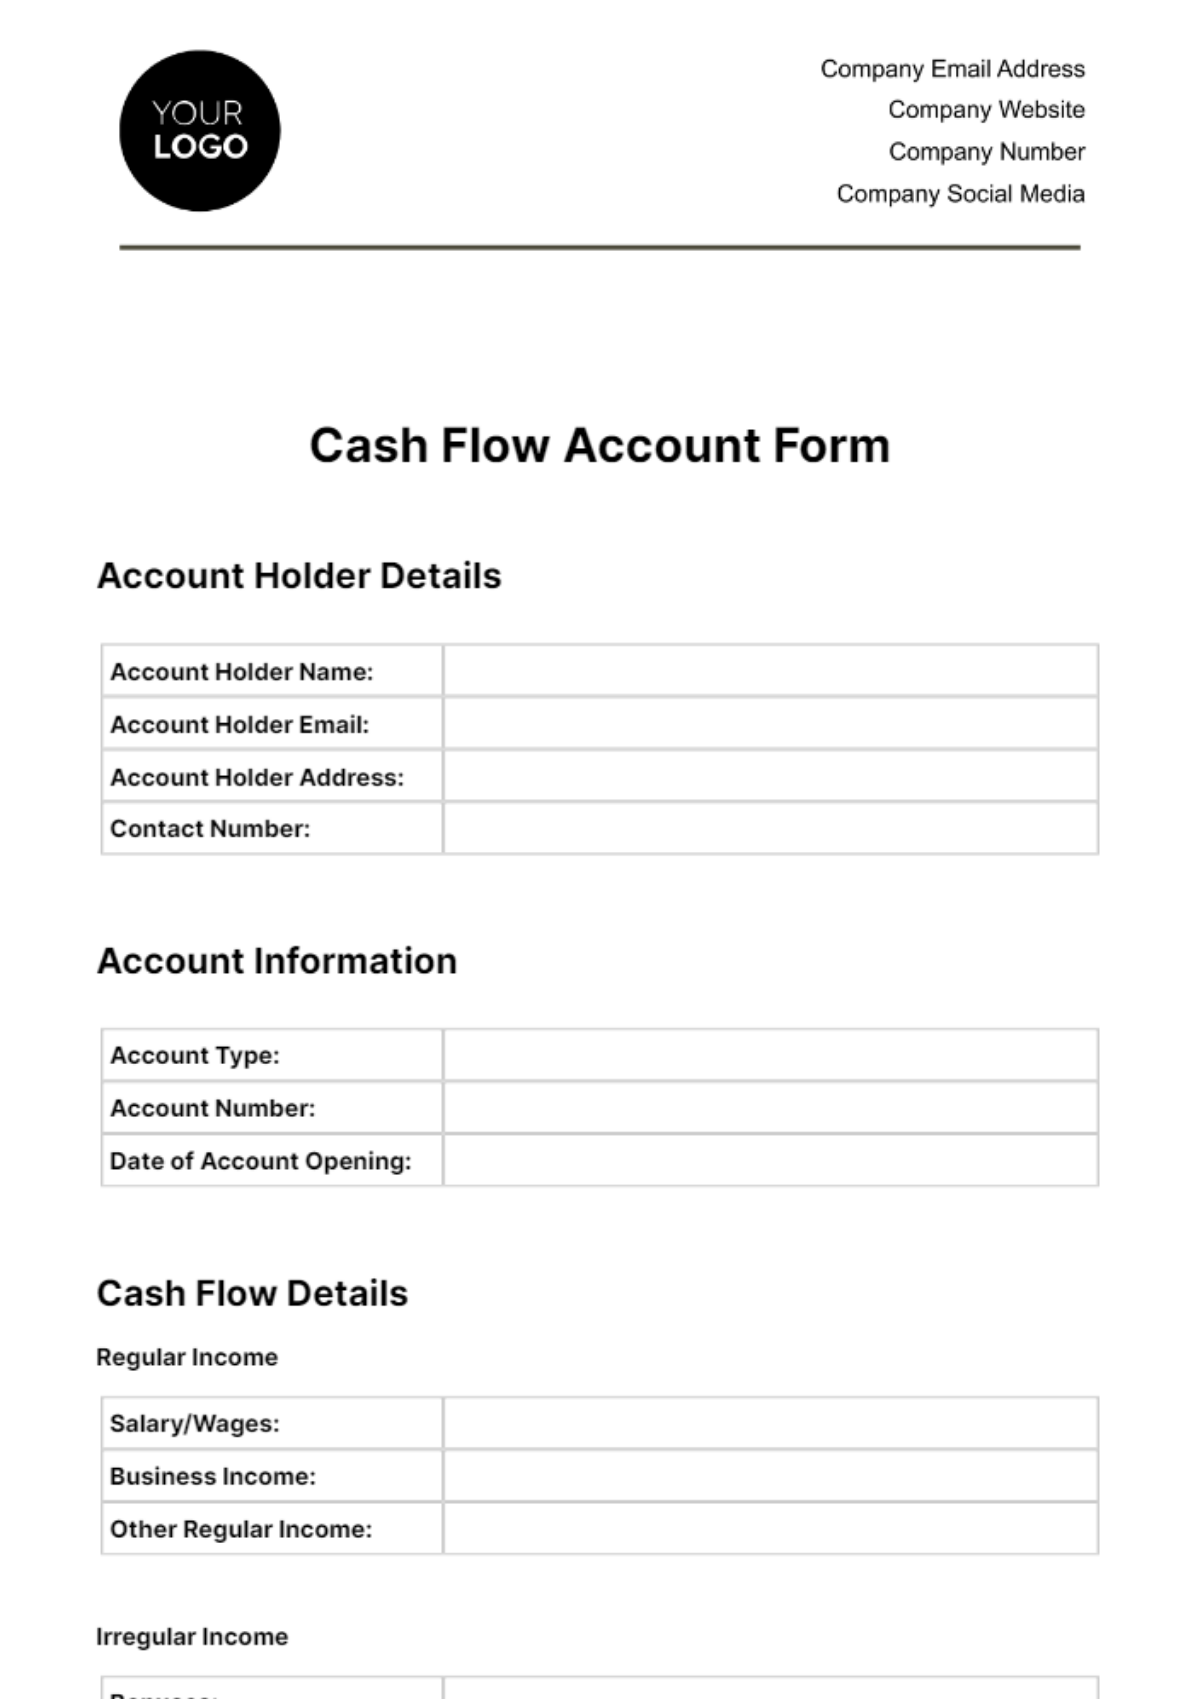 Free Cash Flow Account Form Template